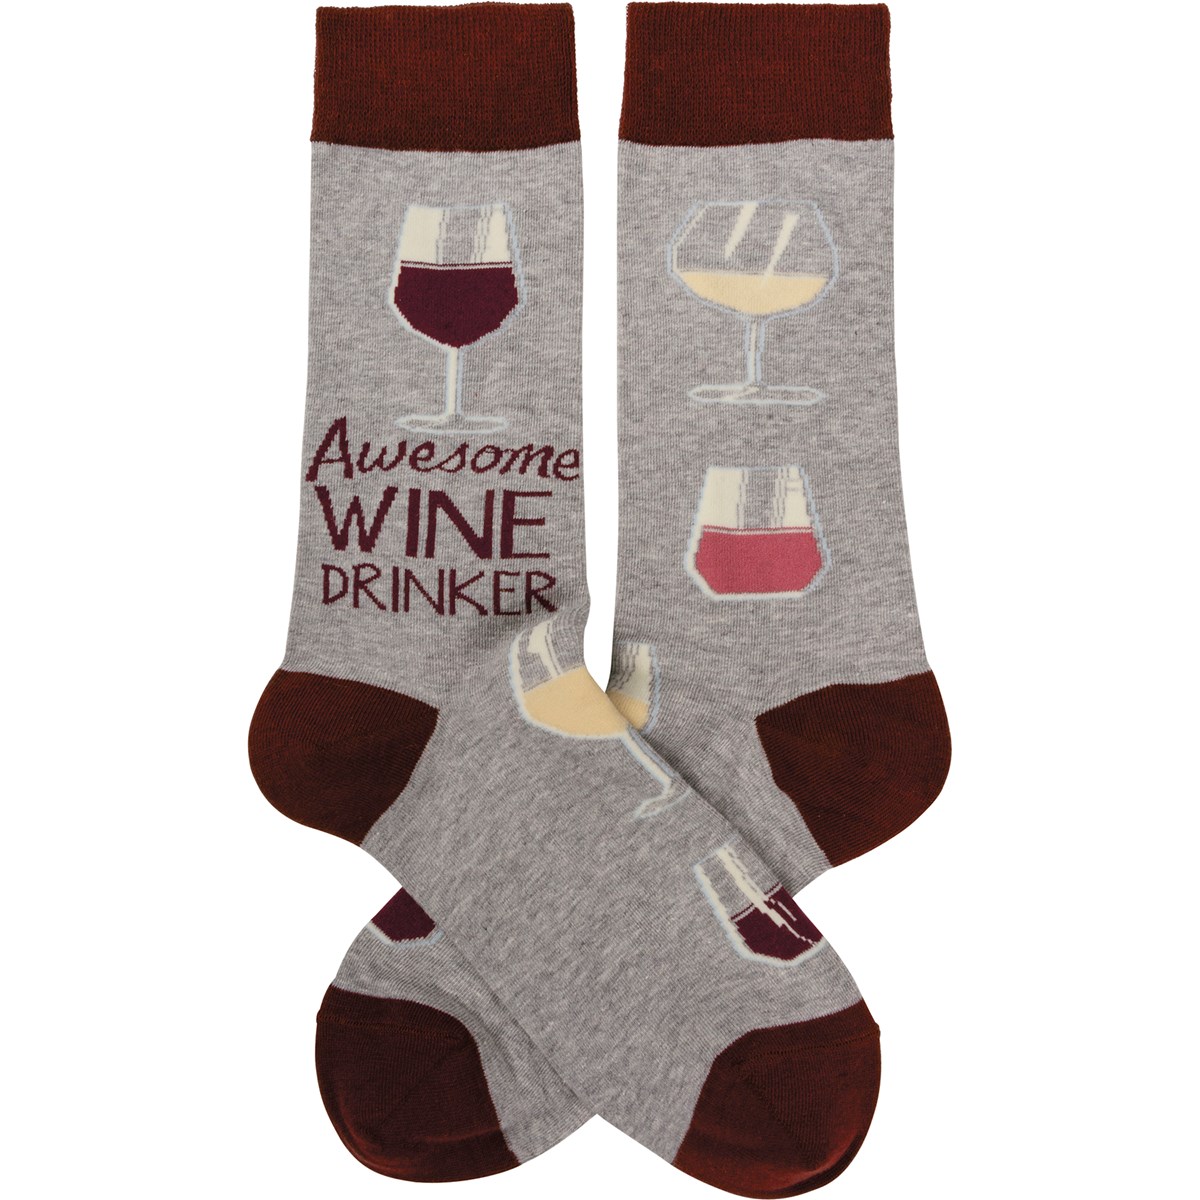 Socks - Awesome Wine Drinker - One Size Fits Most - Cotton, Nylon, Spandex